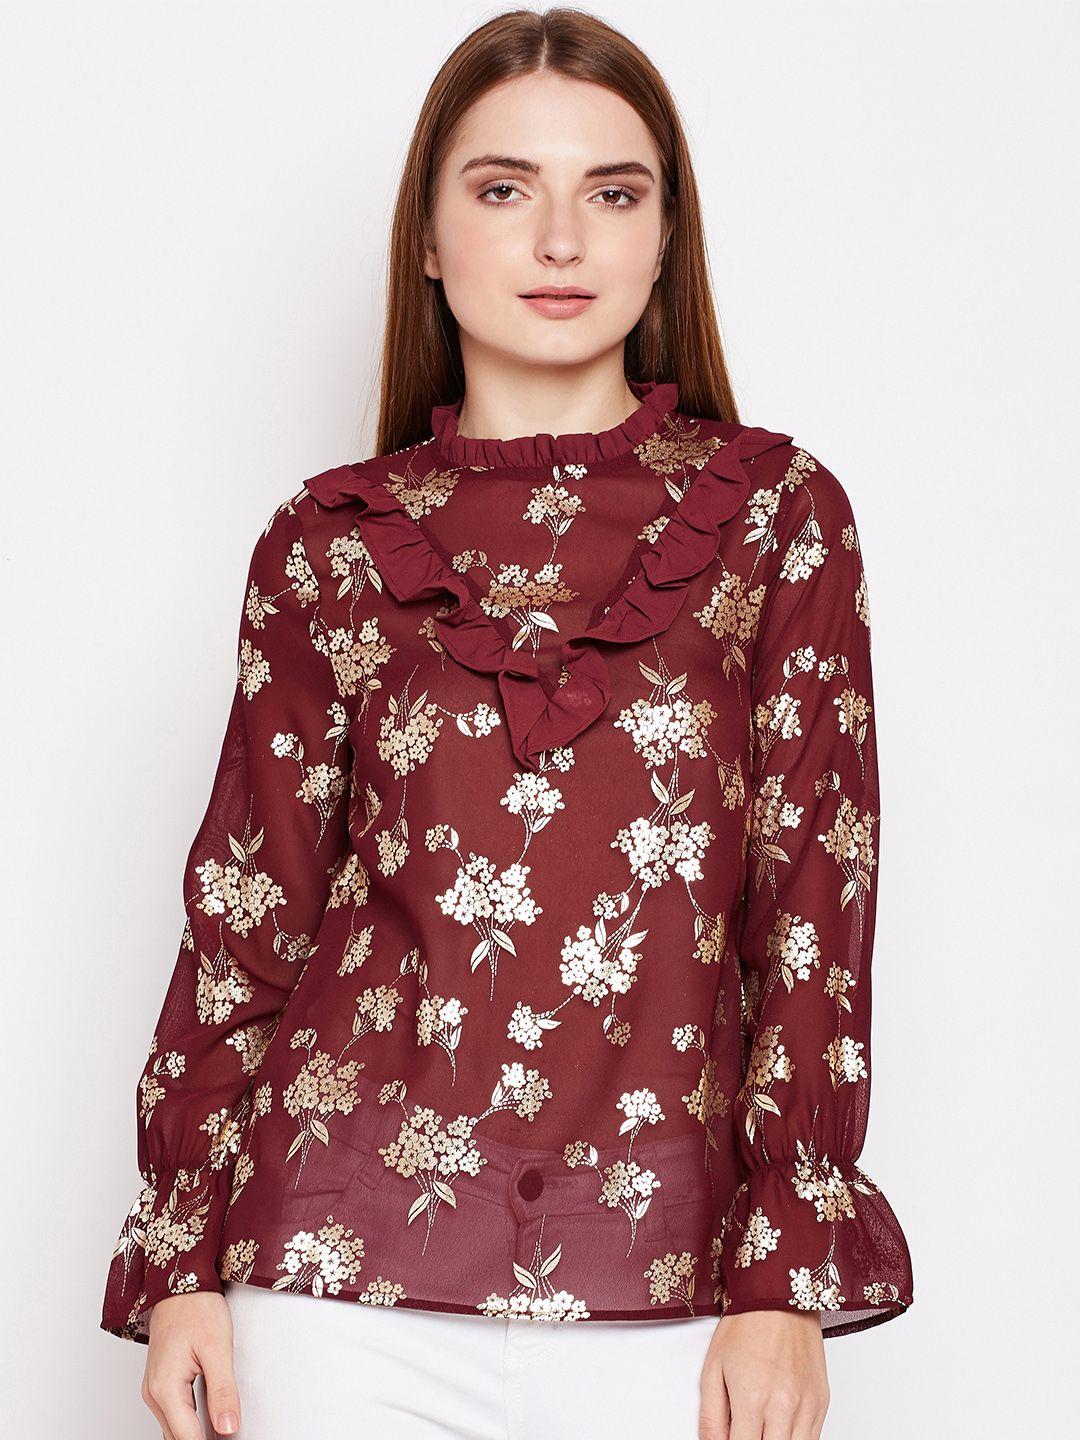 oxolloxo women maroon and gold-toned printed cinched waist top